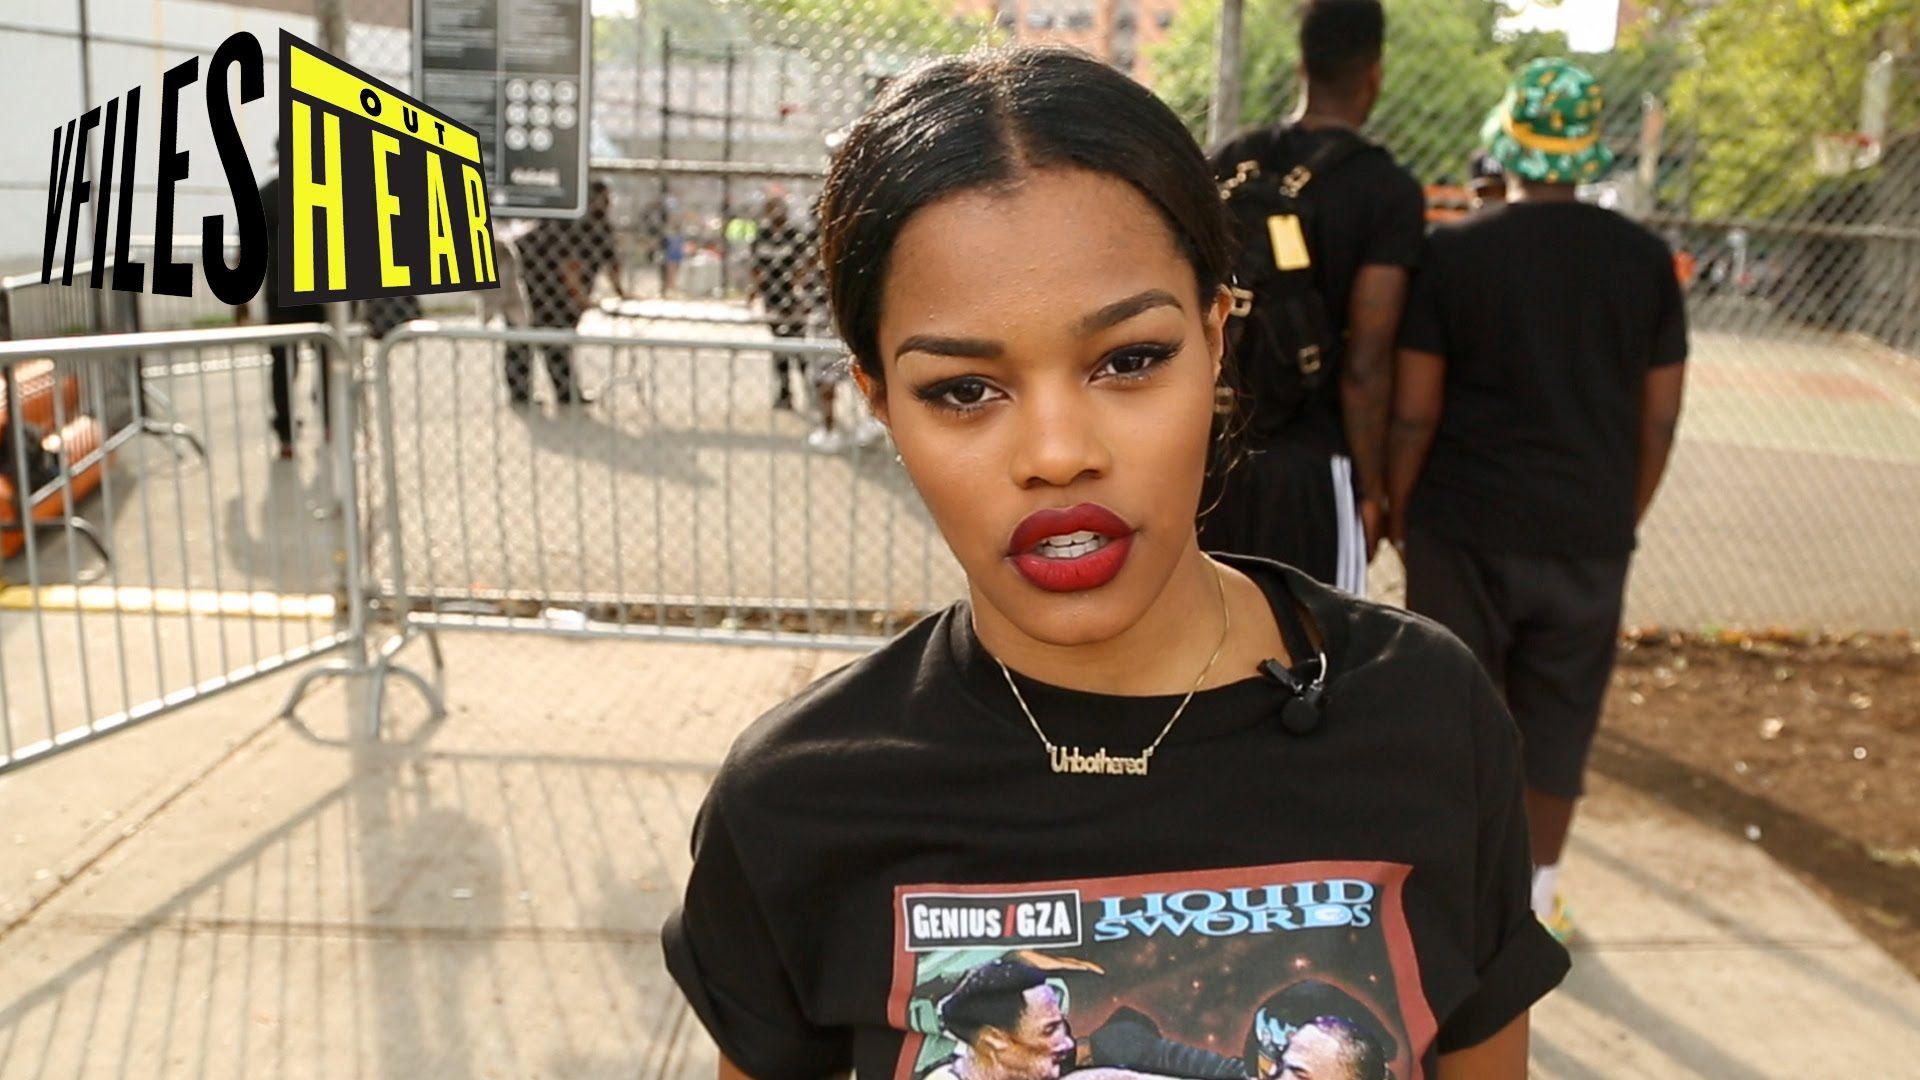 Teyana Taylor Wallpapers High Resolution and Quality Download.